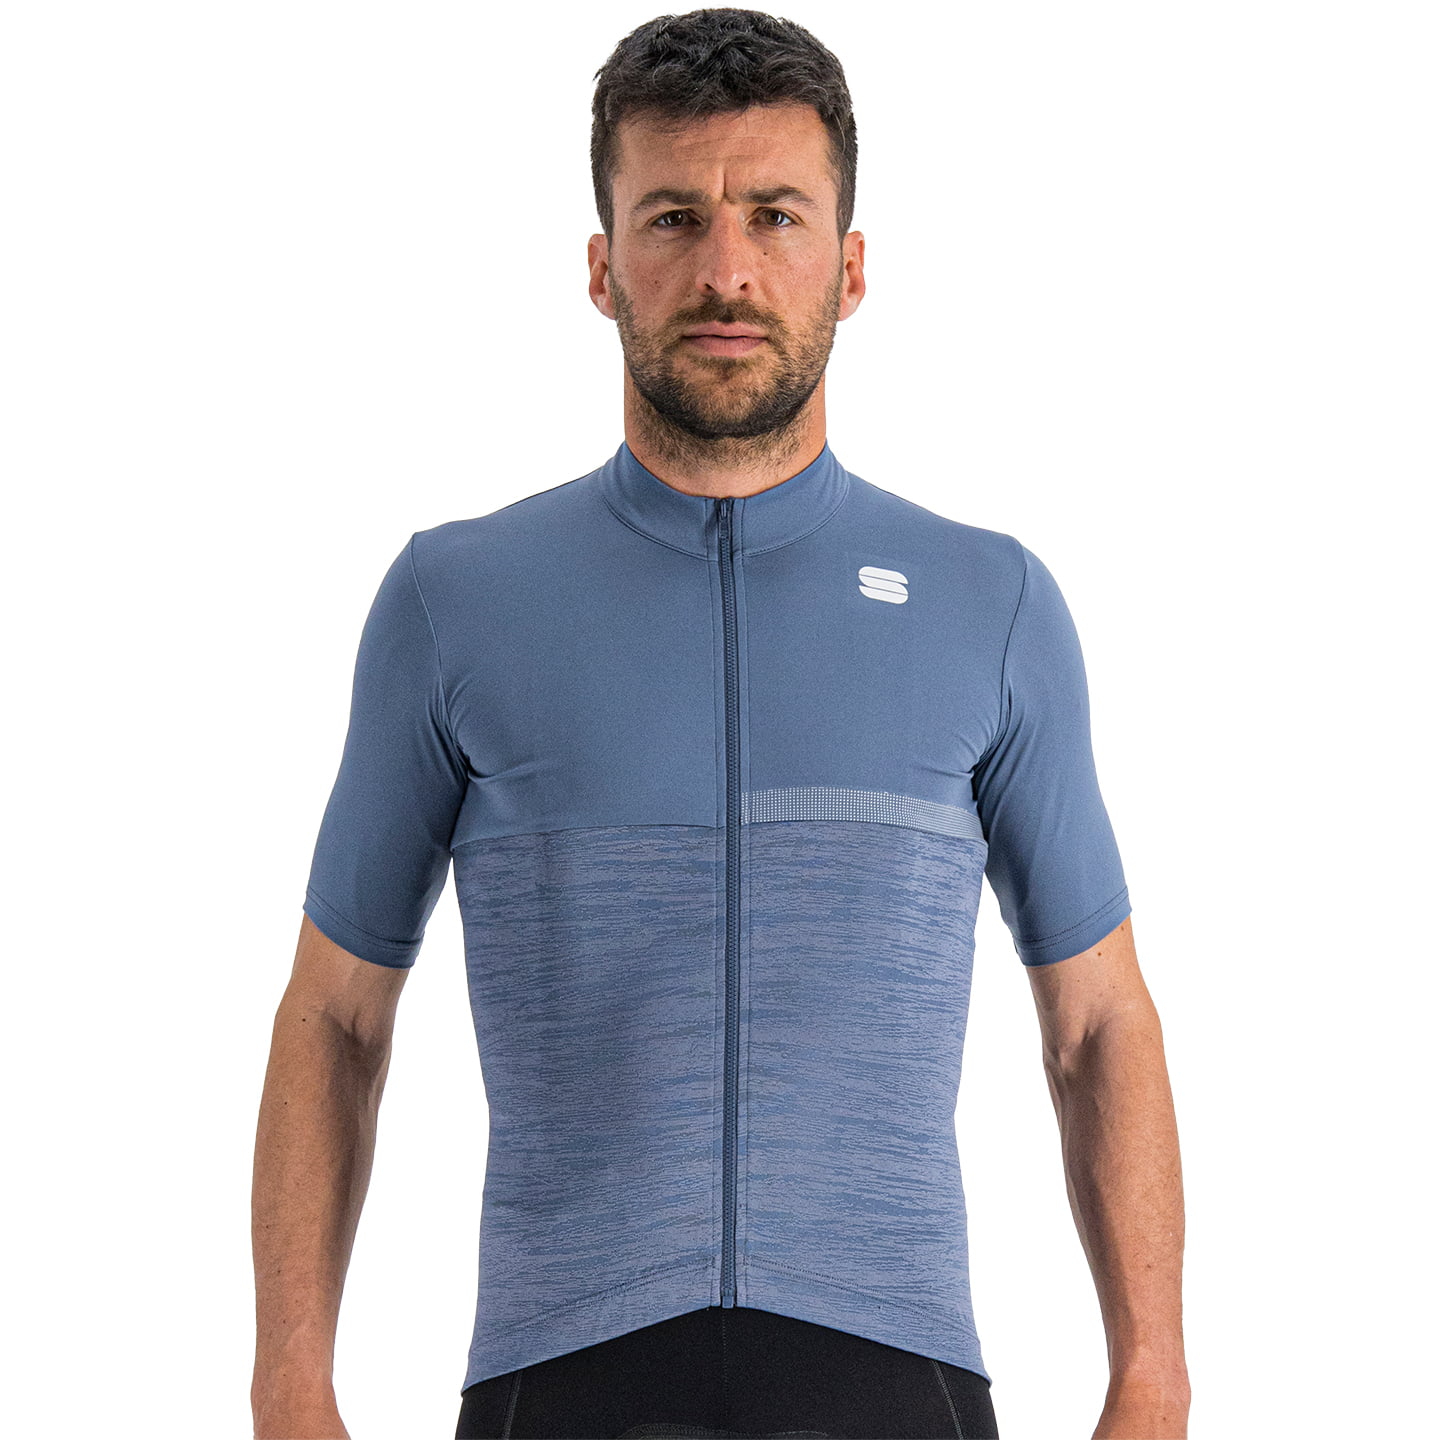 SPORTFUL Giara Short Sleeve Jersey, for men, size XL, Cycling jersey, Cycle clothing